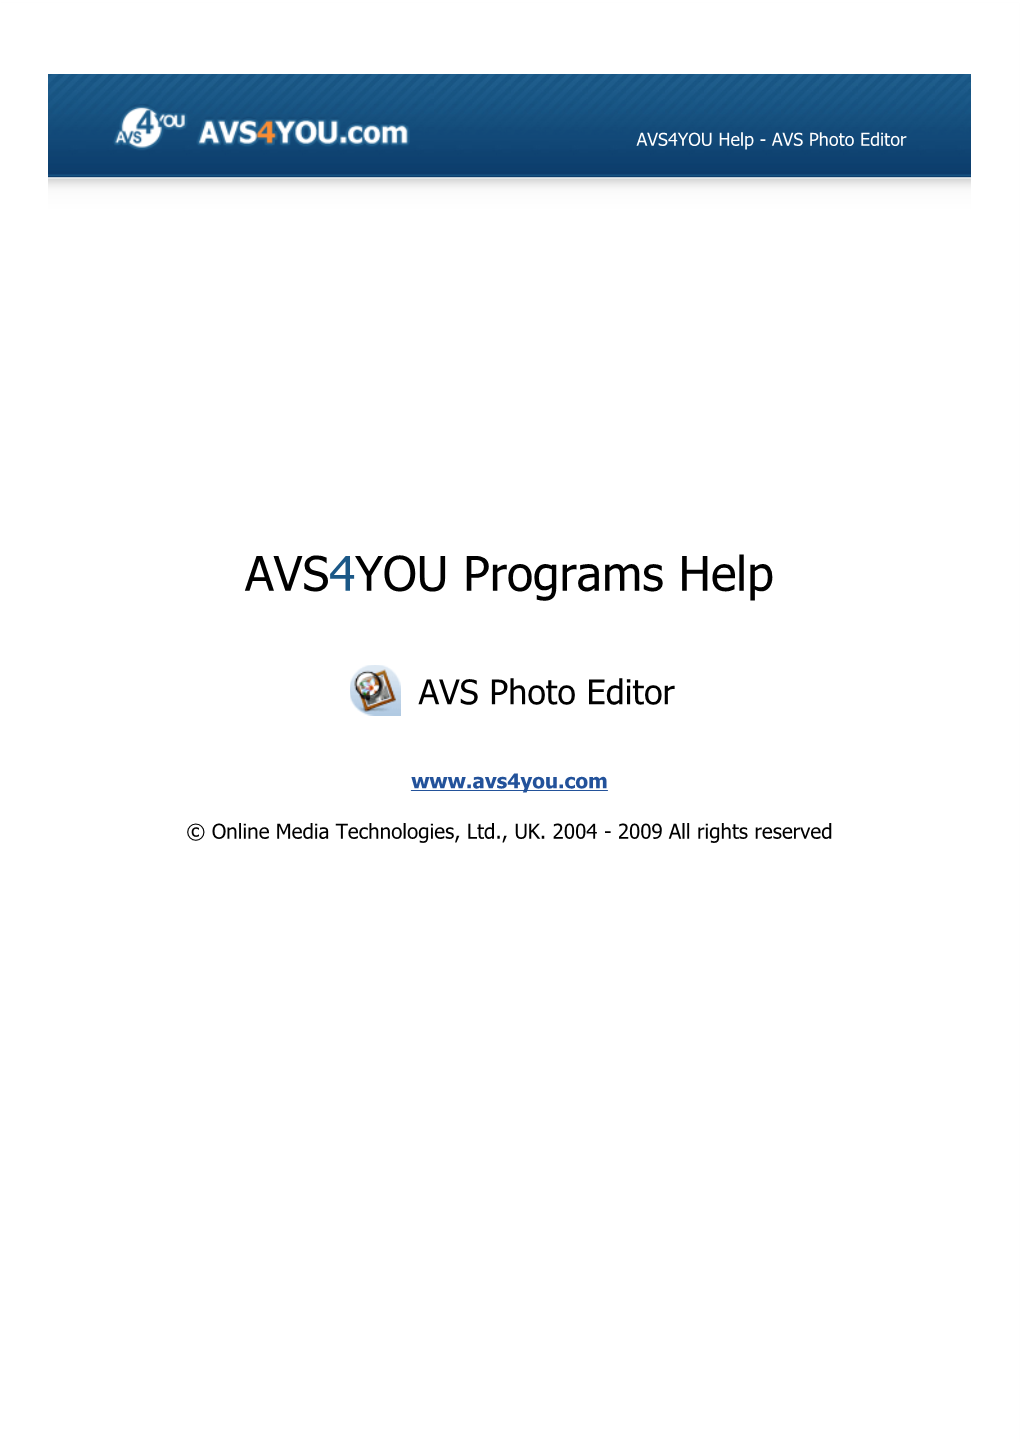 AVS Photo Editor Help in PDF Download